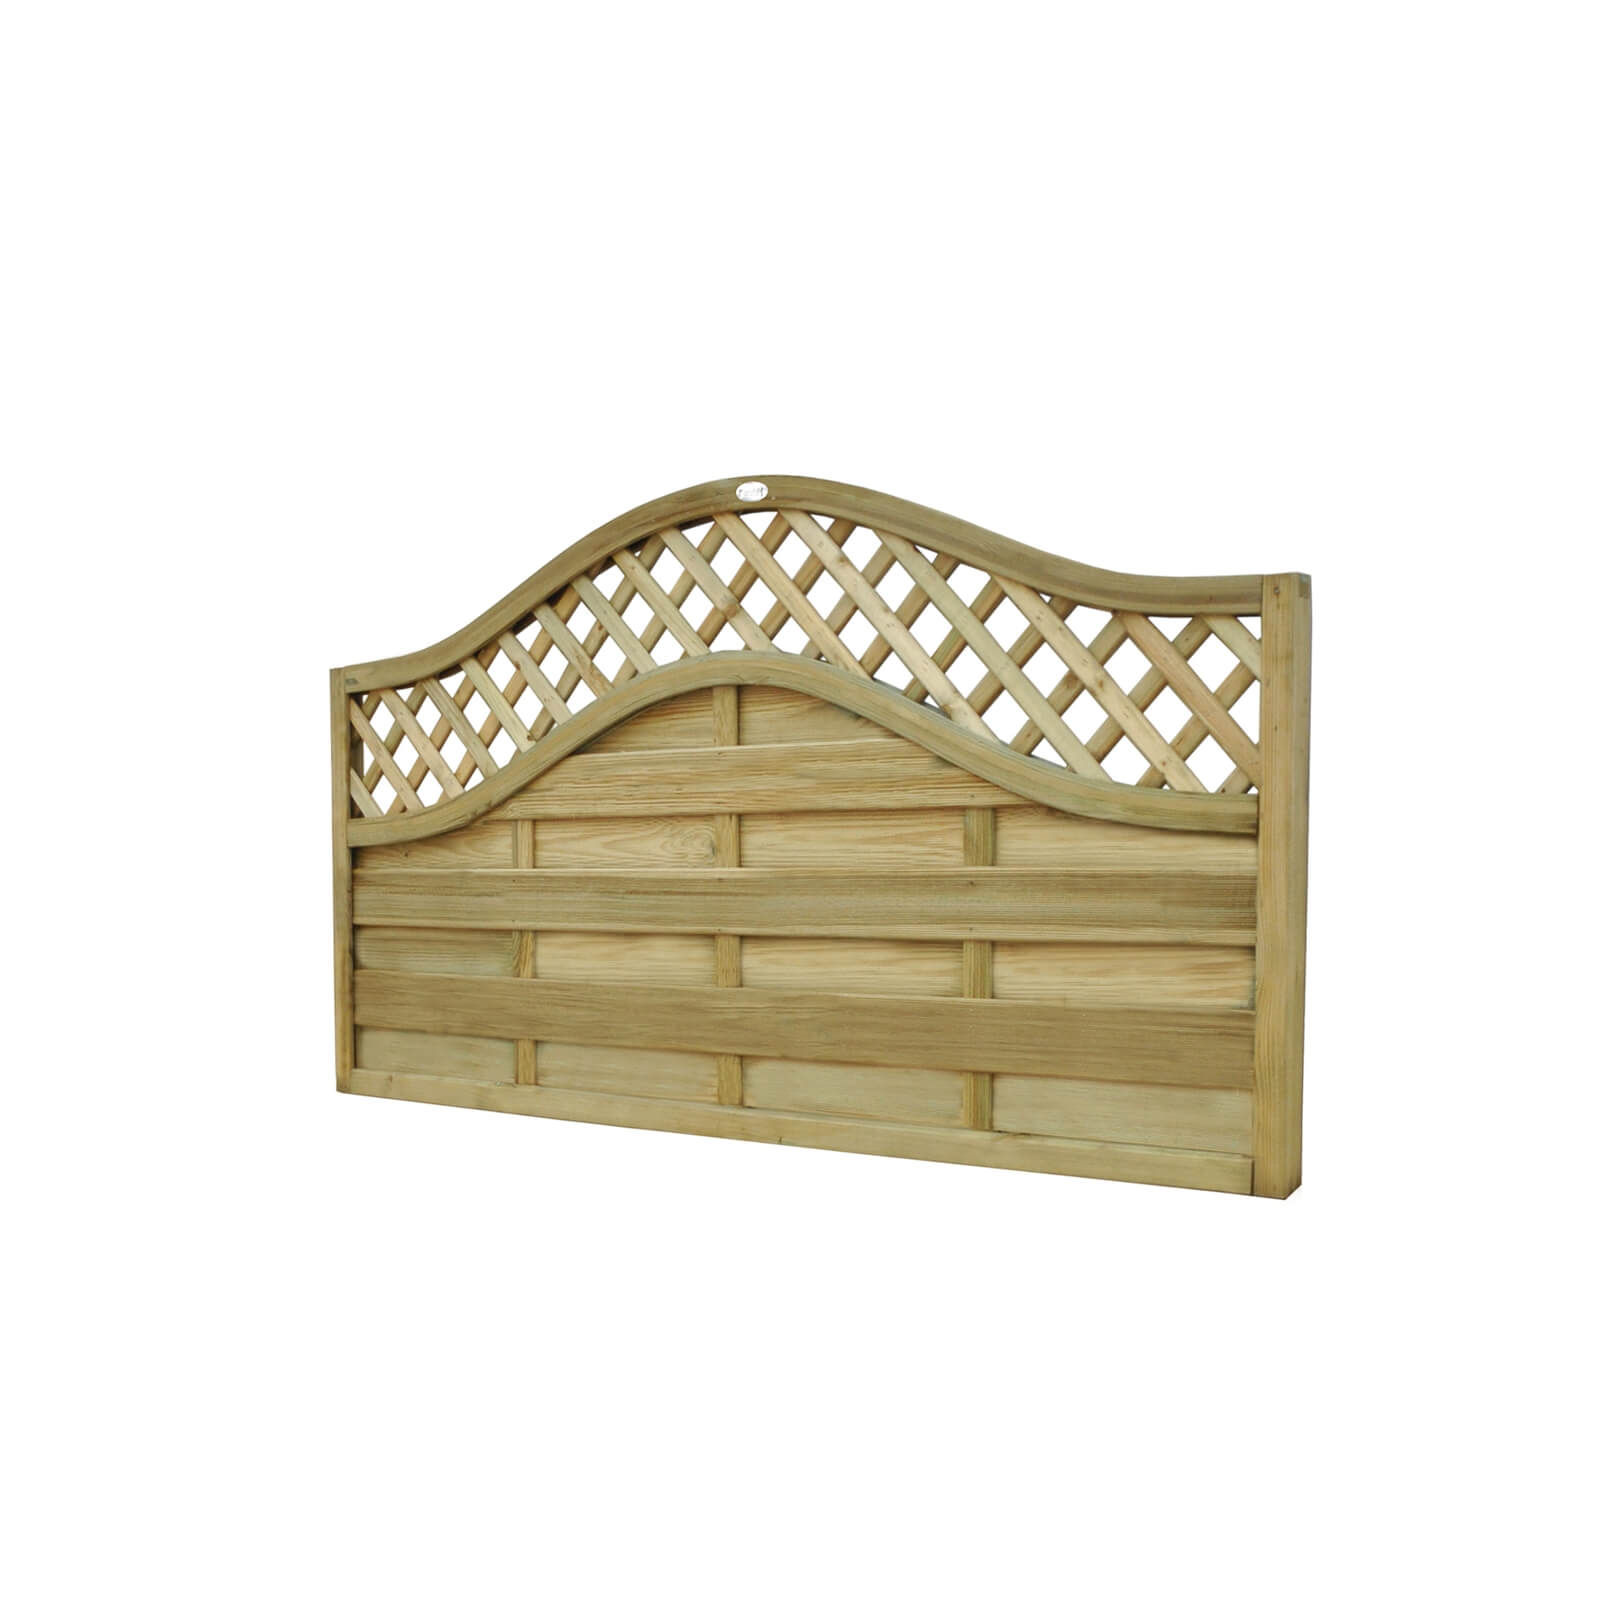 1.8m x 0.9m Pressure Treated Decorative Europa Prague Fence Panel - Pack of 5